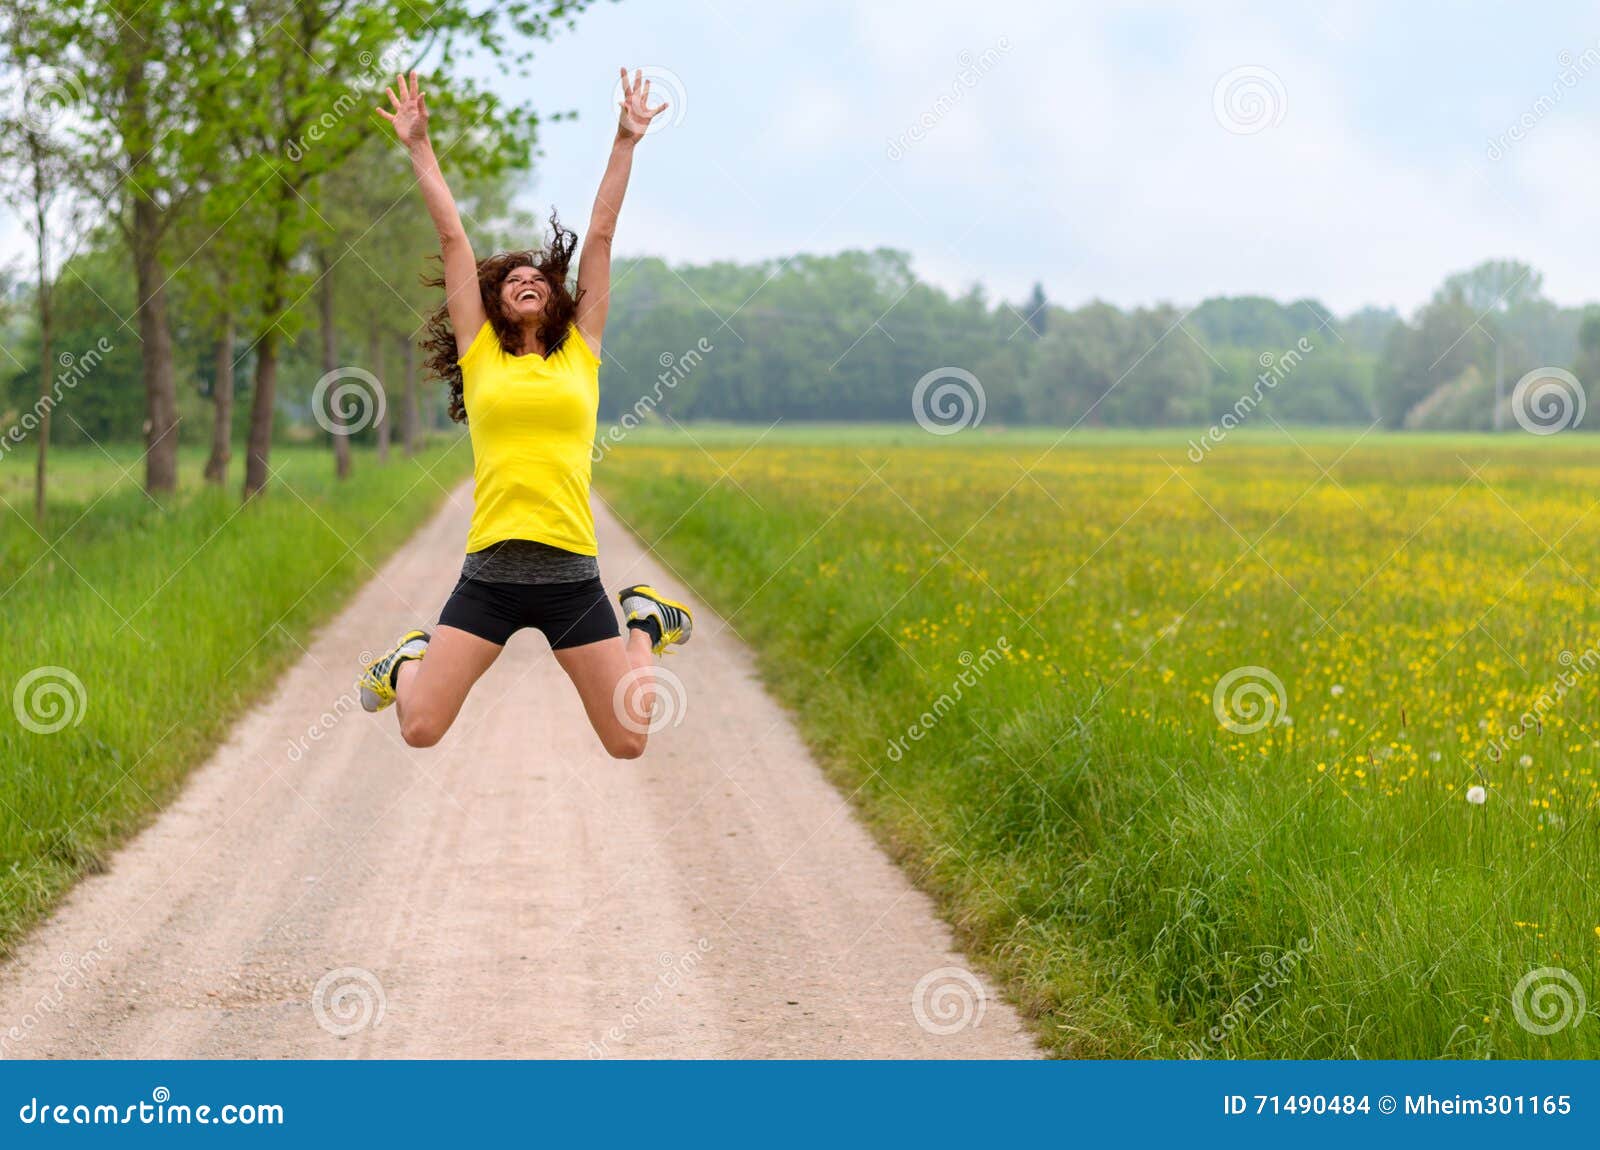 energetic agile young woman leaping for joy